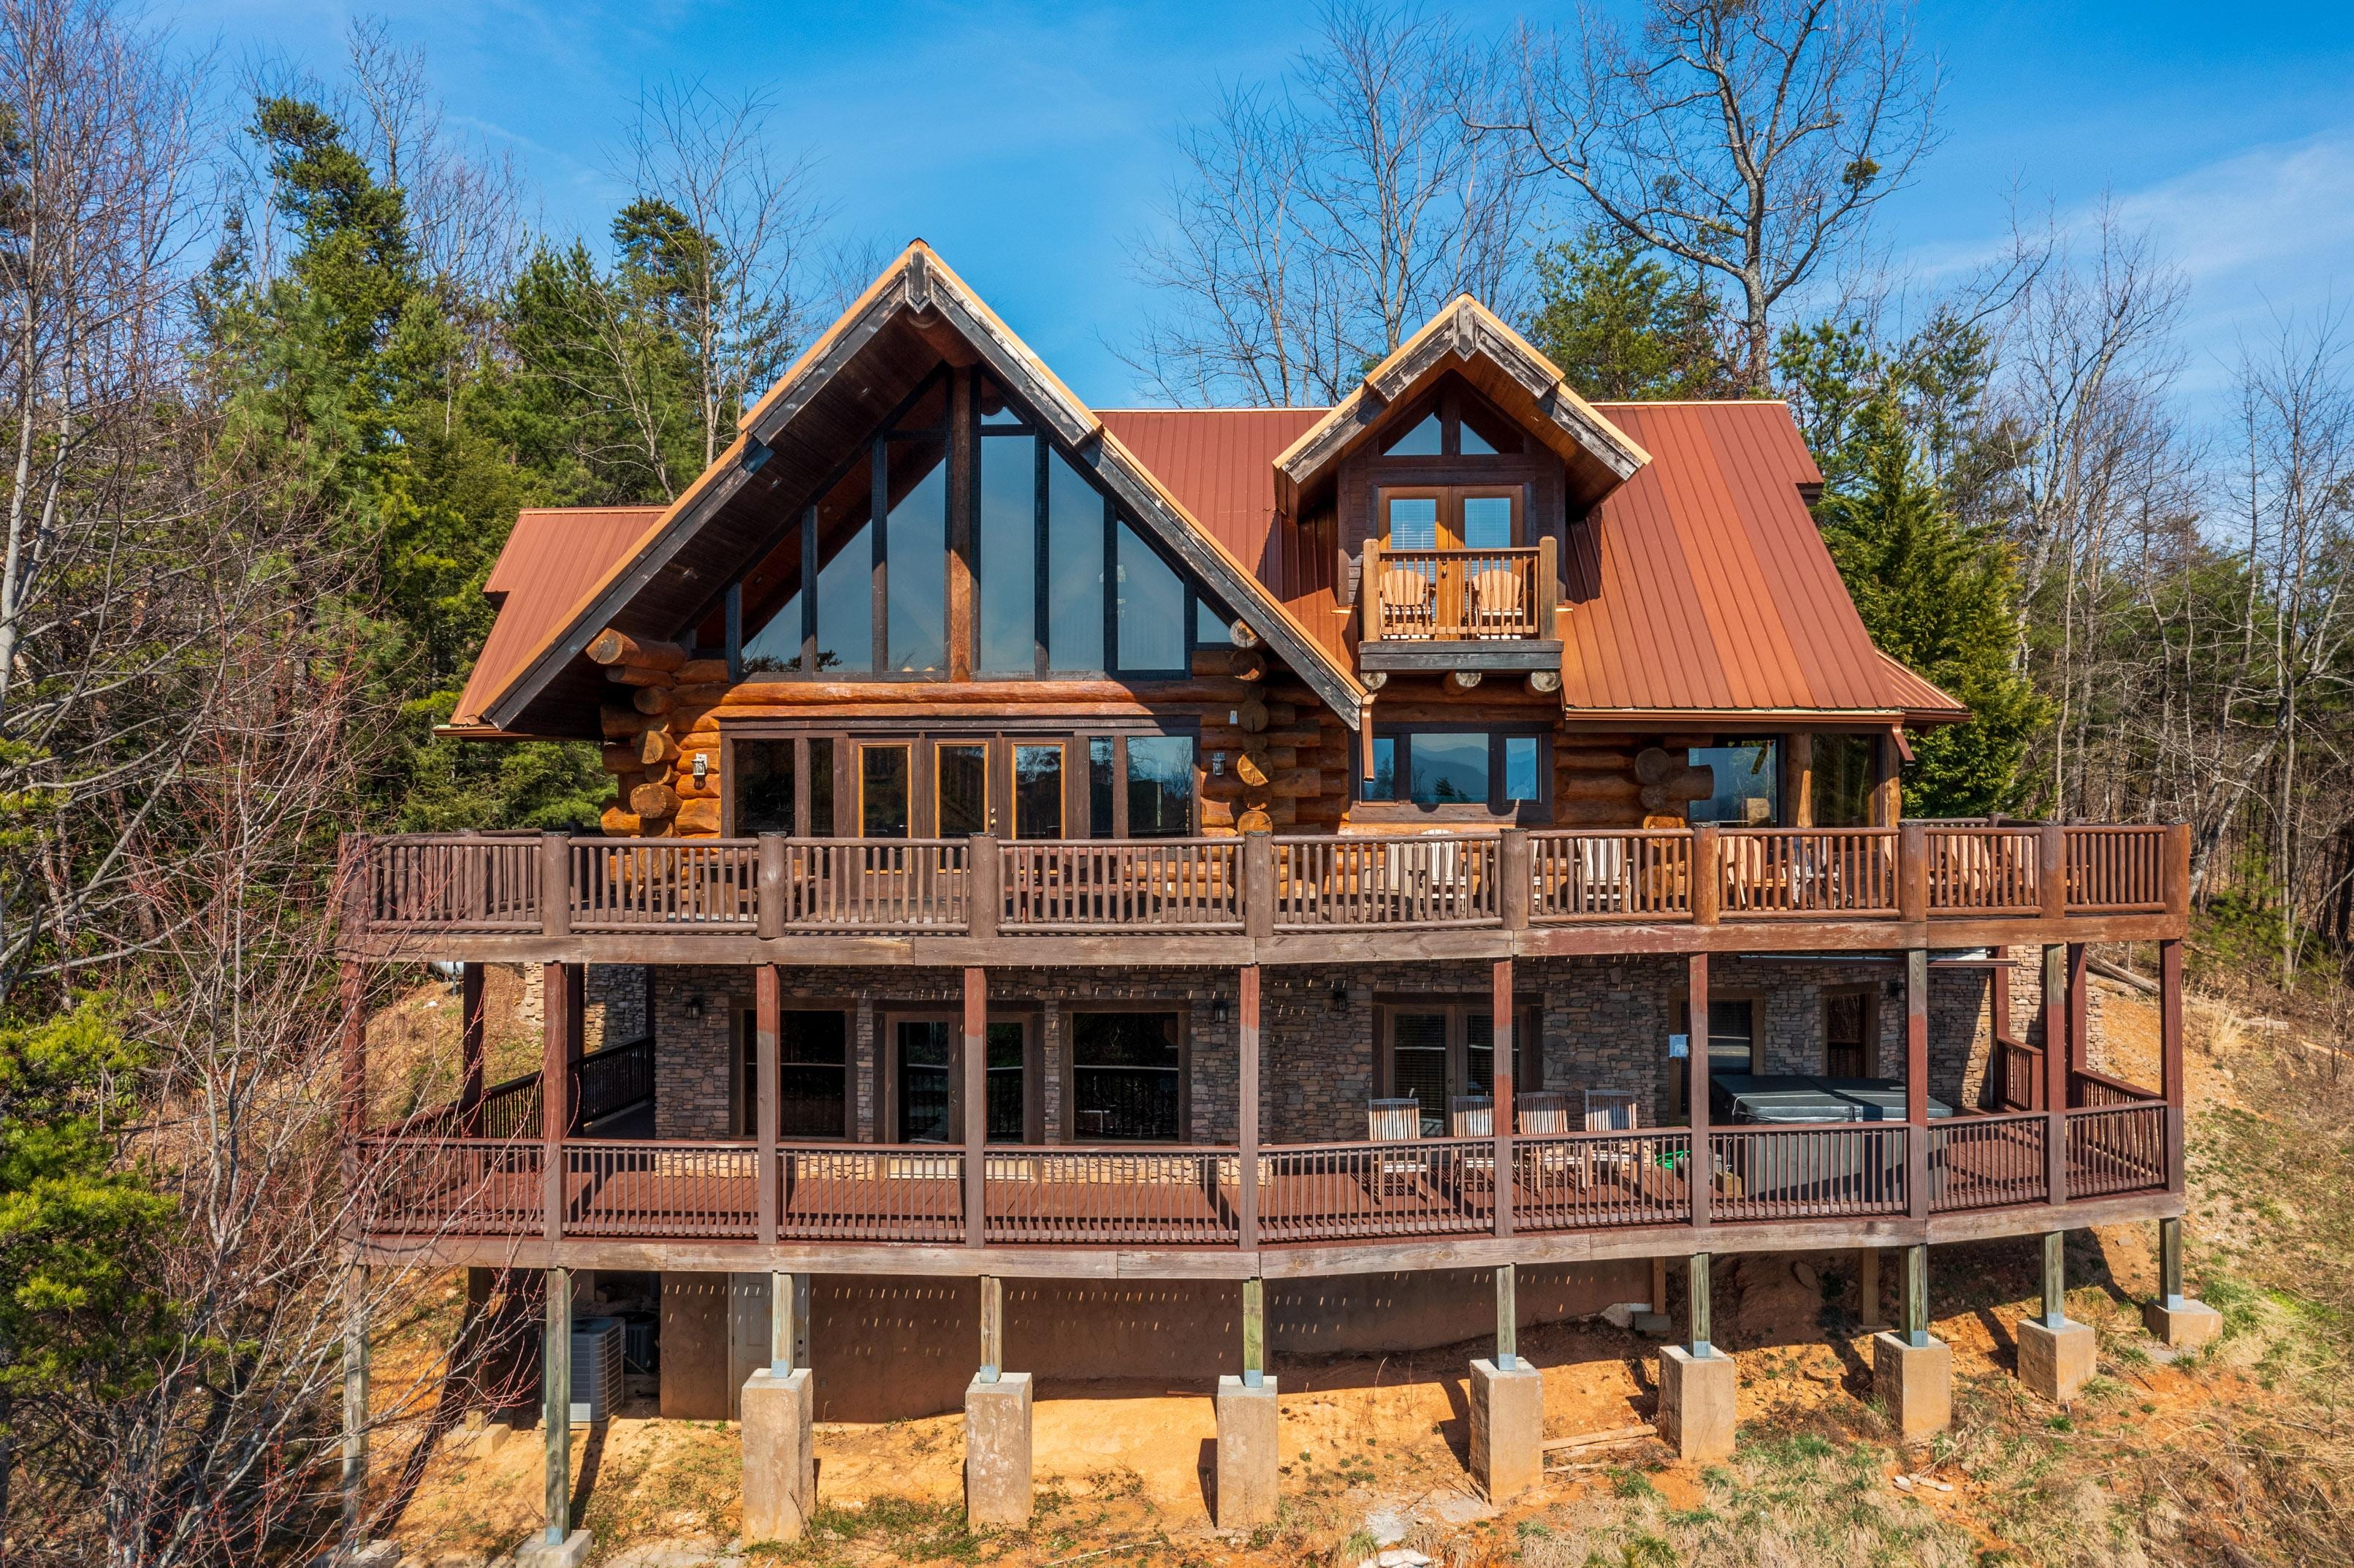 Large wrap around decks with awesome picture windows. Perfect for outdoor relaxation in the Smokies! 